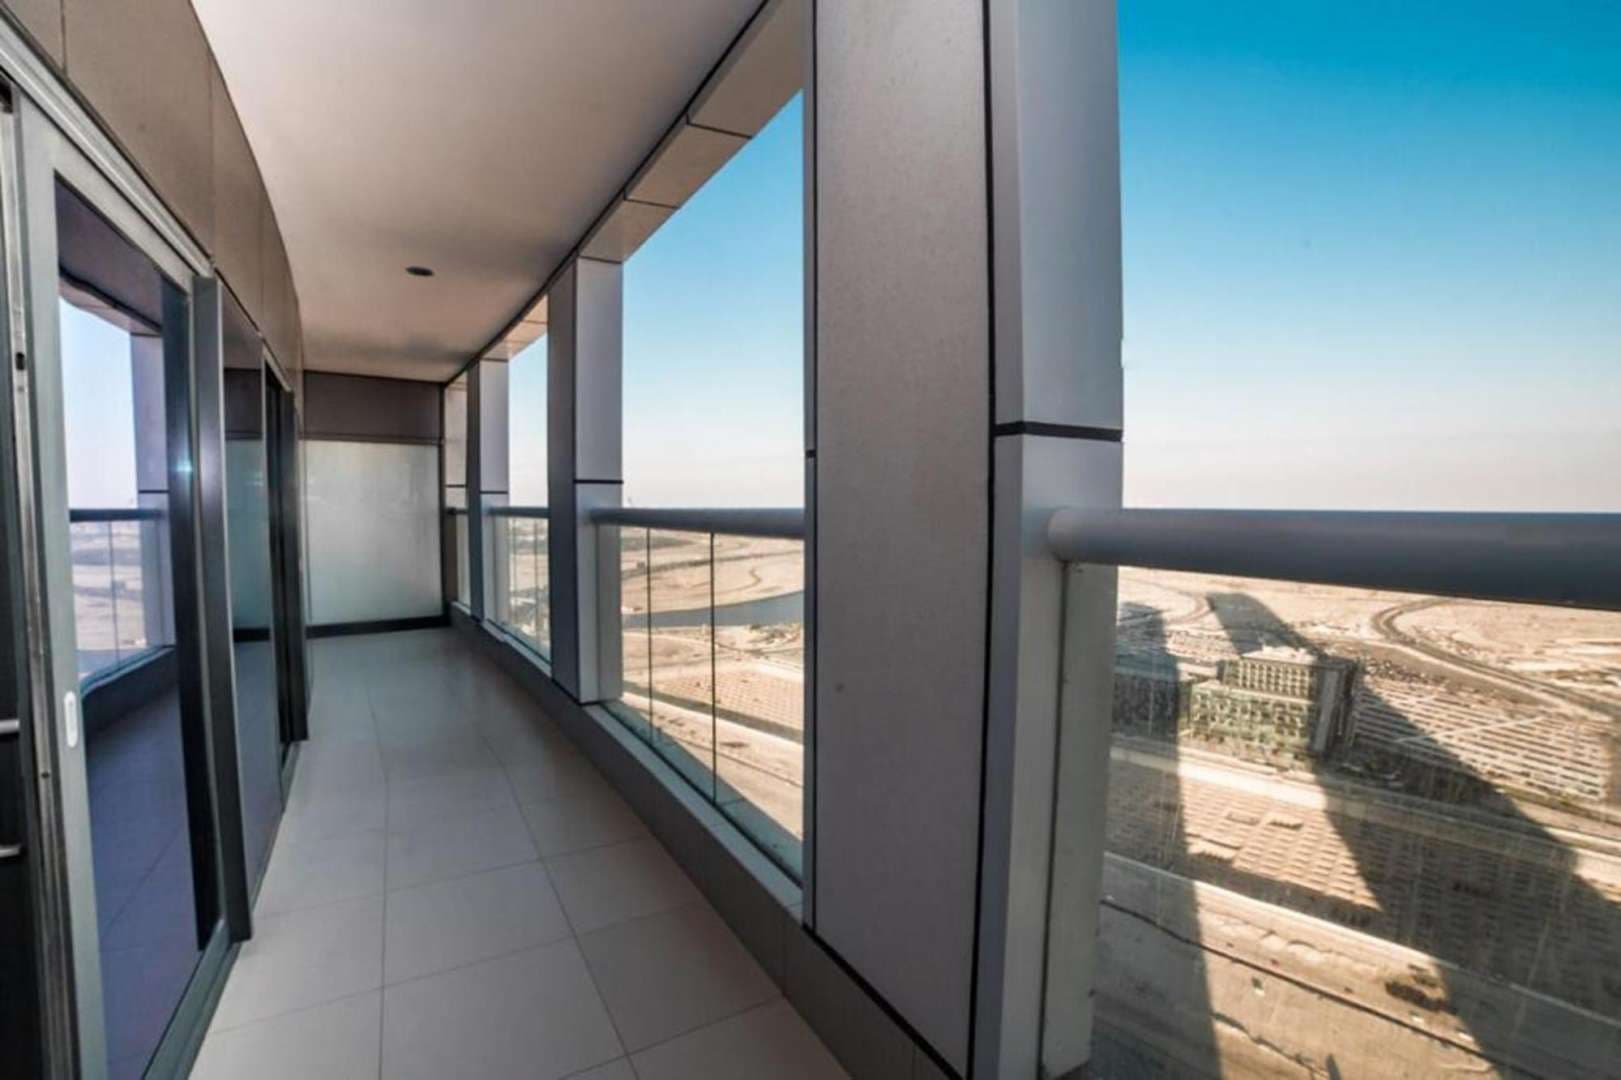 1 Bedroom Apartment For Sale Damac Towers By Paramount Lp06012 E7aab28fb4dcf80.jpg